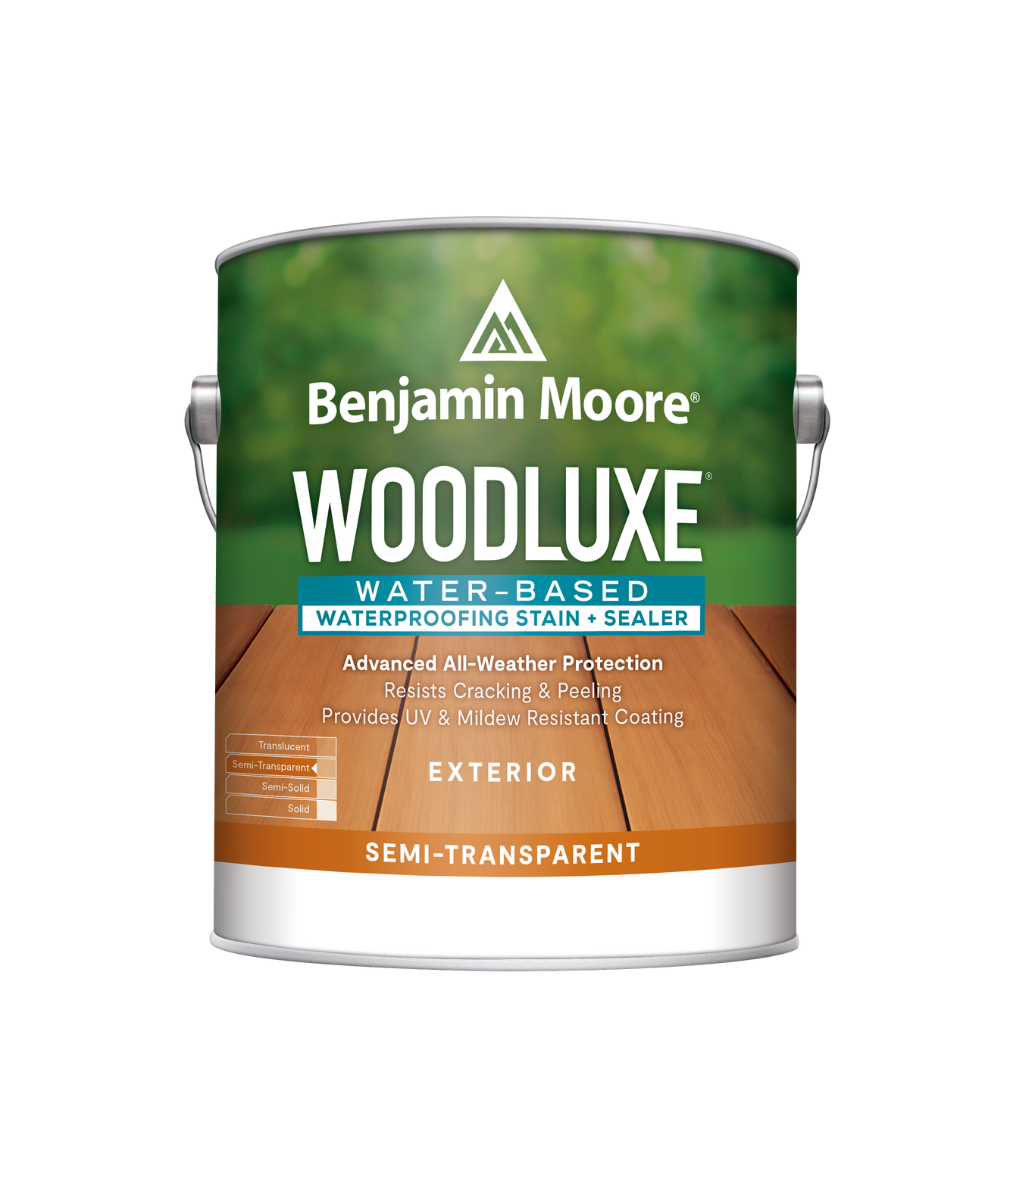 Benjamin Moore Woodluxe® Water-Based Semi-Transparent available at Southwestern Paint.